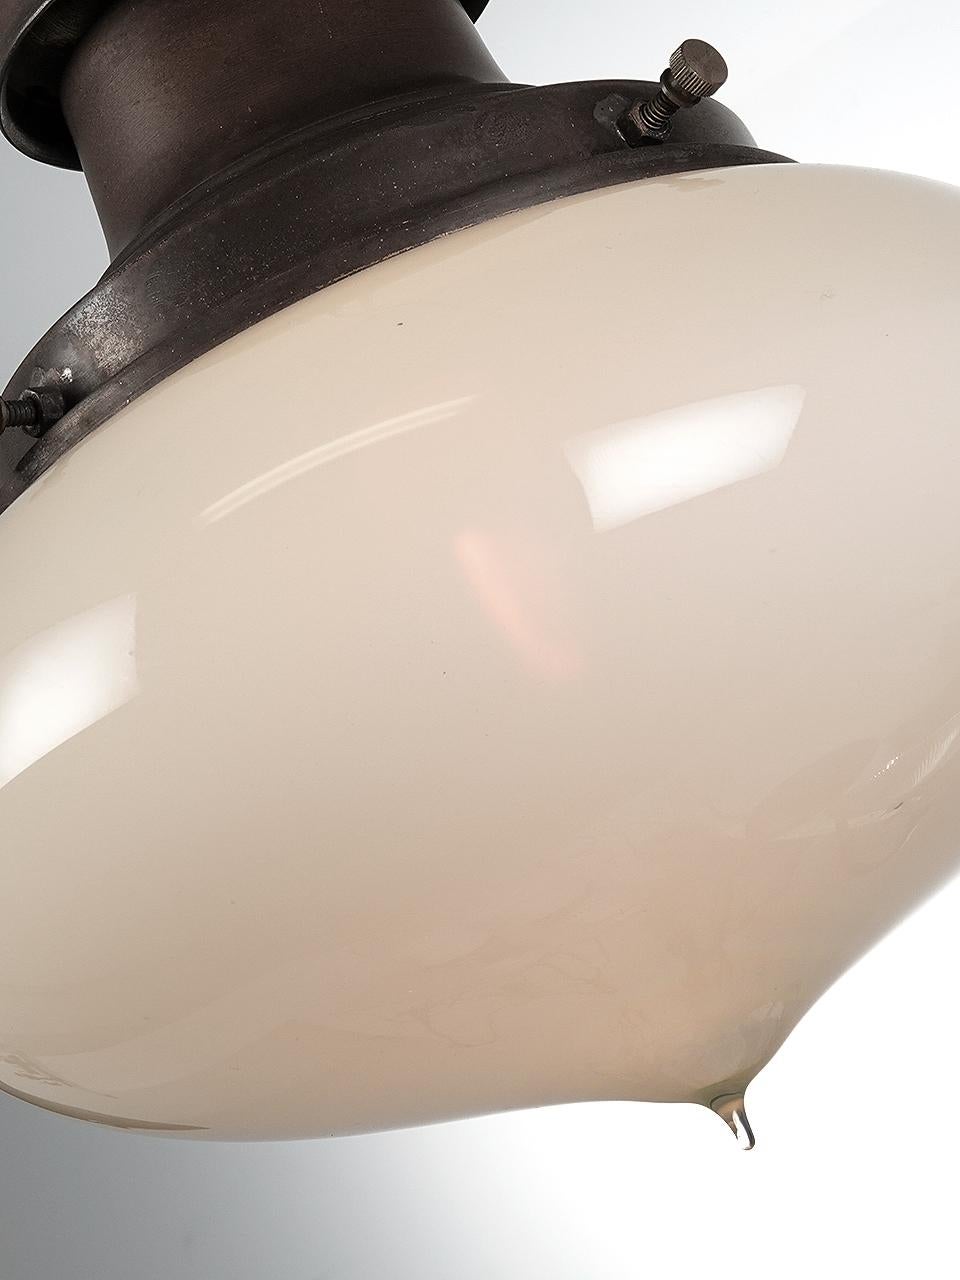 These early elegant hand blown tipped shades are vaseline glass. They have a nice even and warm glow with no filament glair. The fixture uses a Gas Era style shade holder. The large 9.5 inch diameter globe is not only dramatic but has a unique and